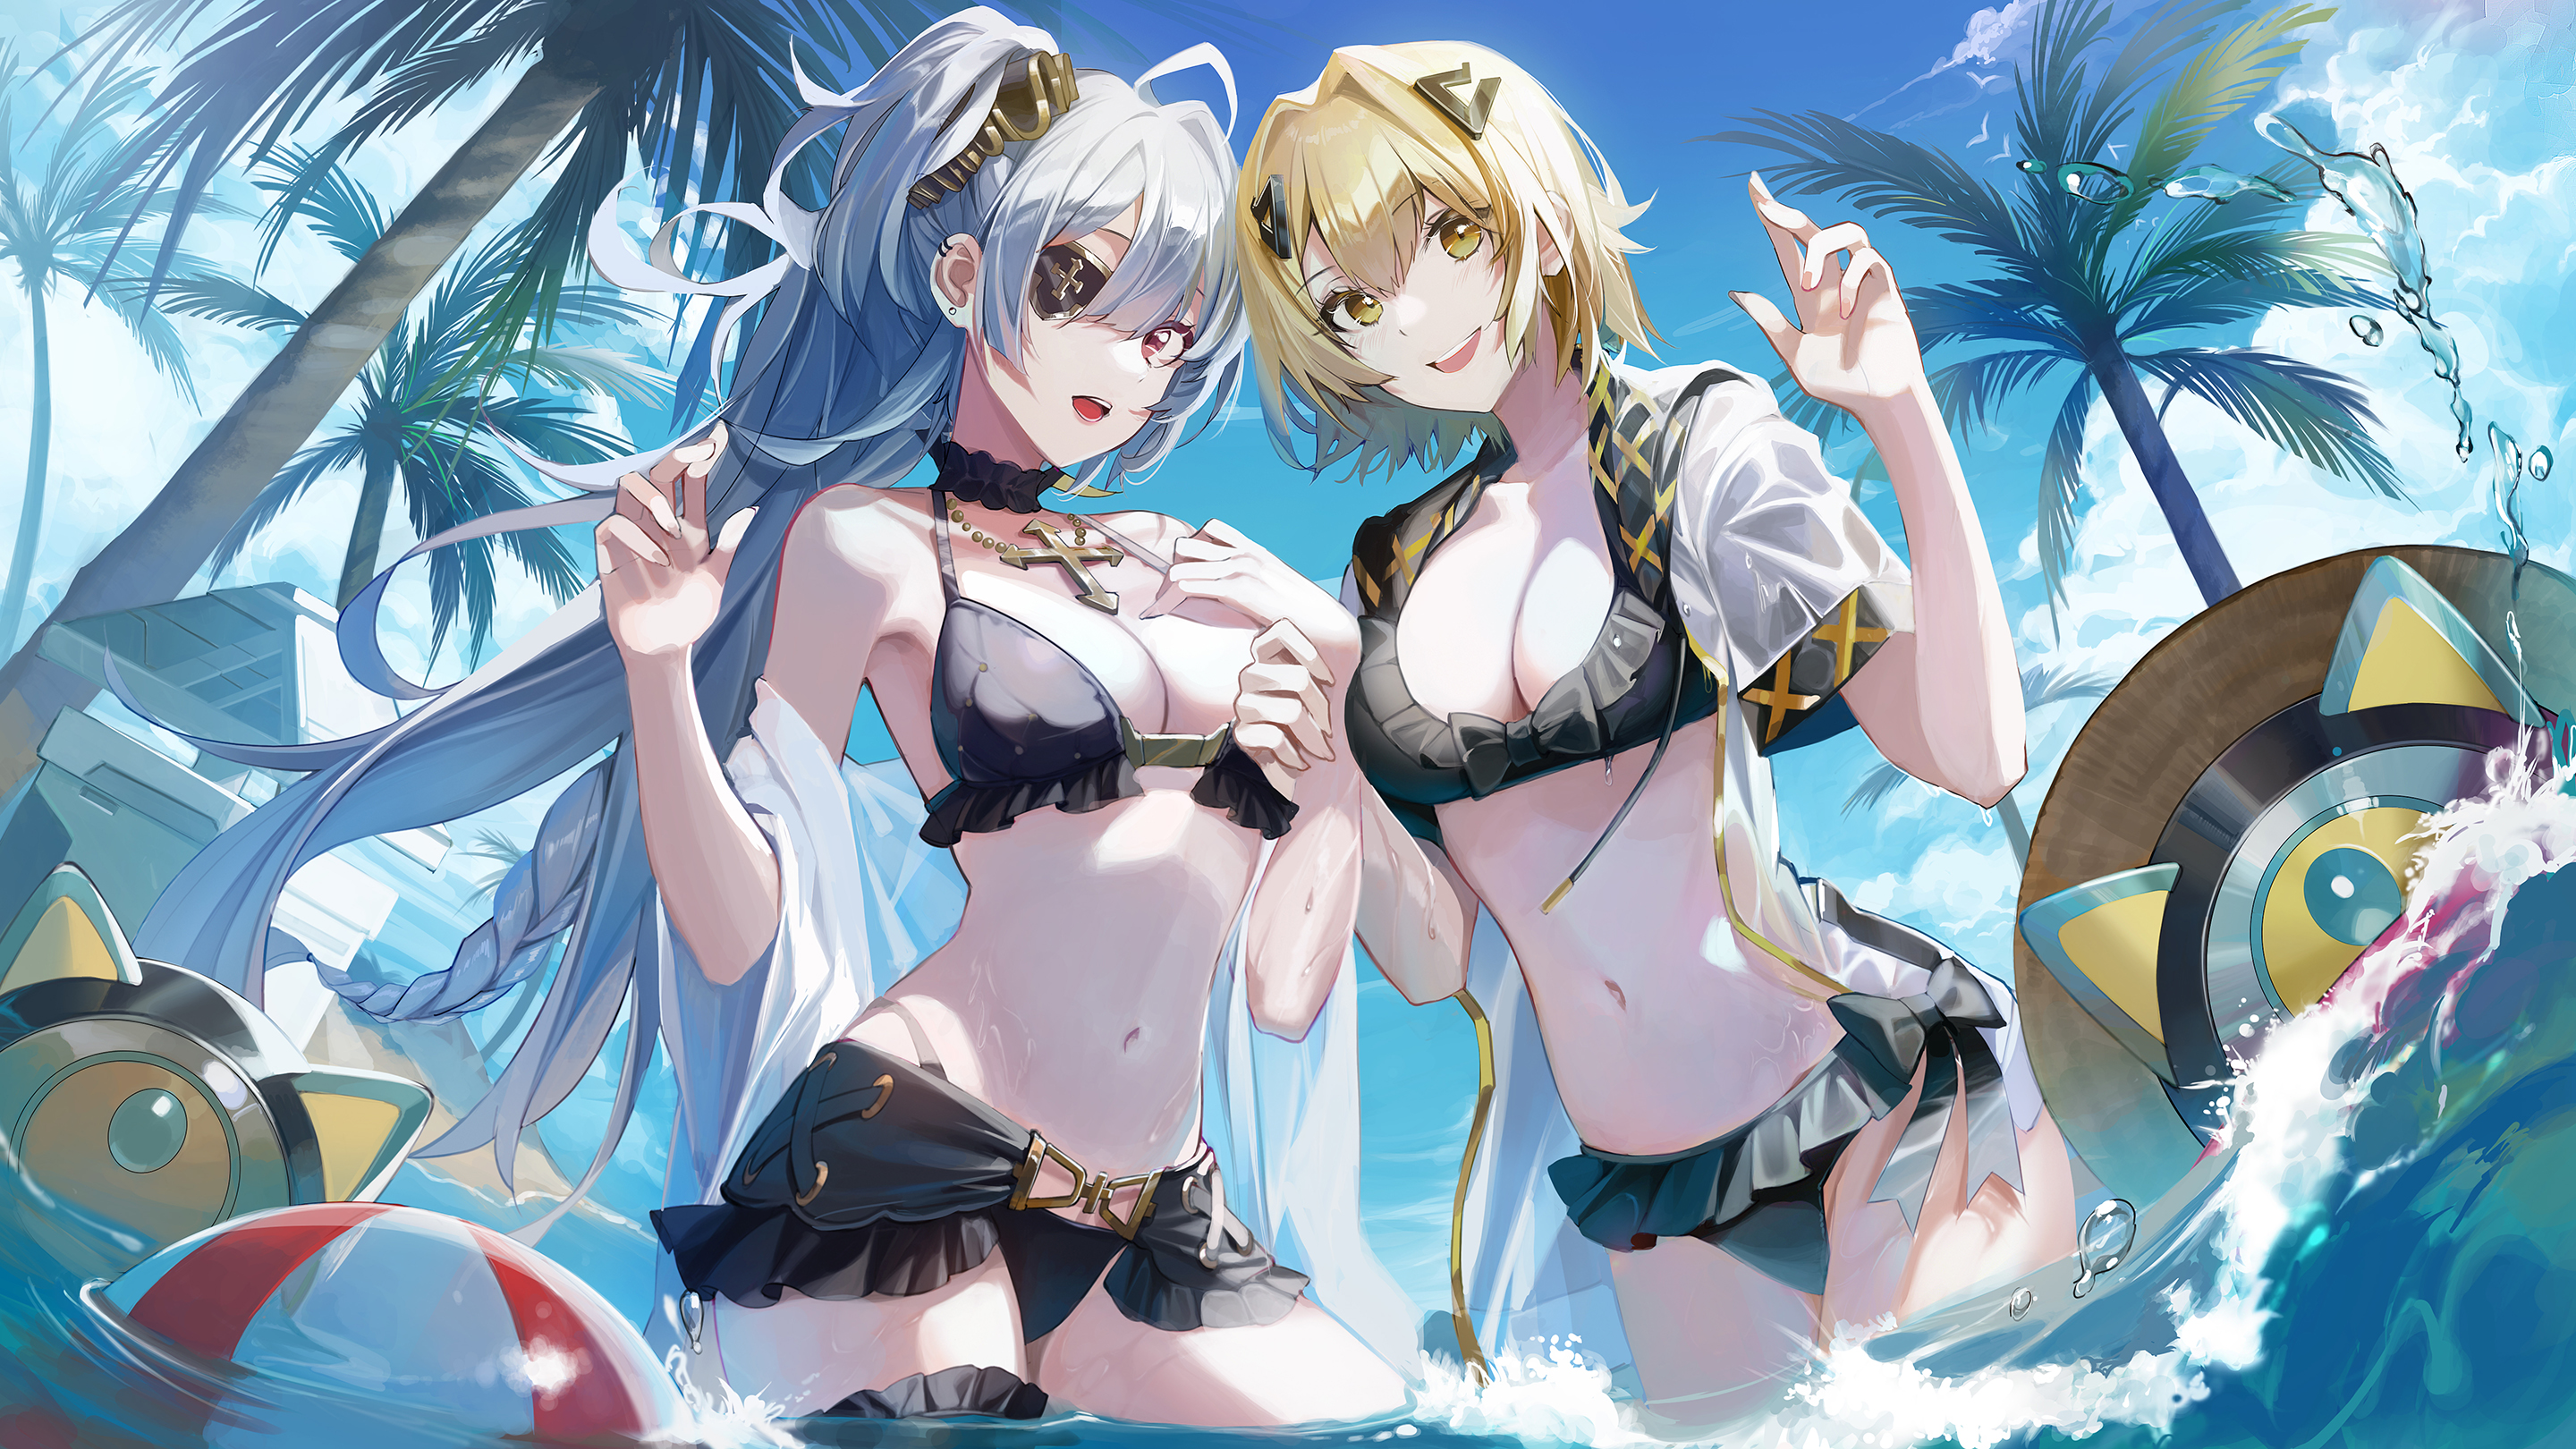 Anime 2880x1620 Buri Alchemy Stars anime anime girls bikini water cleavage eyepatches long hair short hair standing in water sea palm trees beach ball two women water drops women outdoors boobs looking at viewer